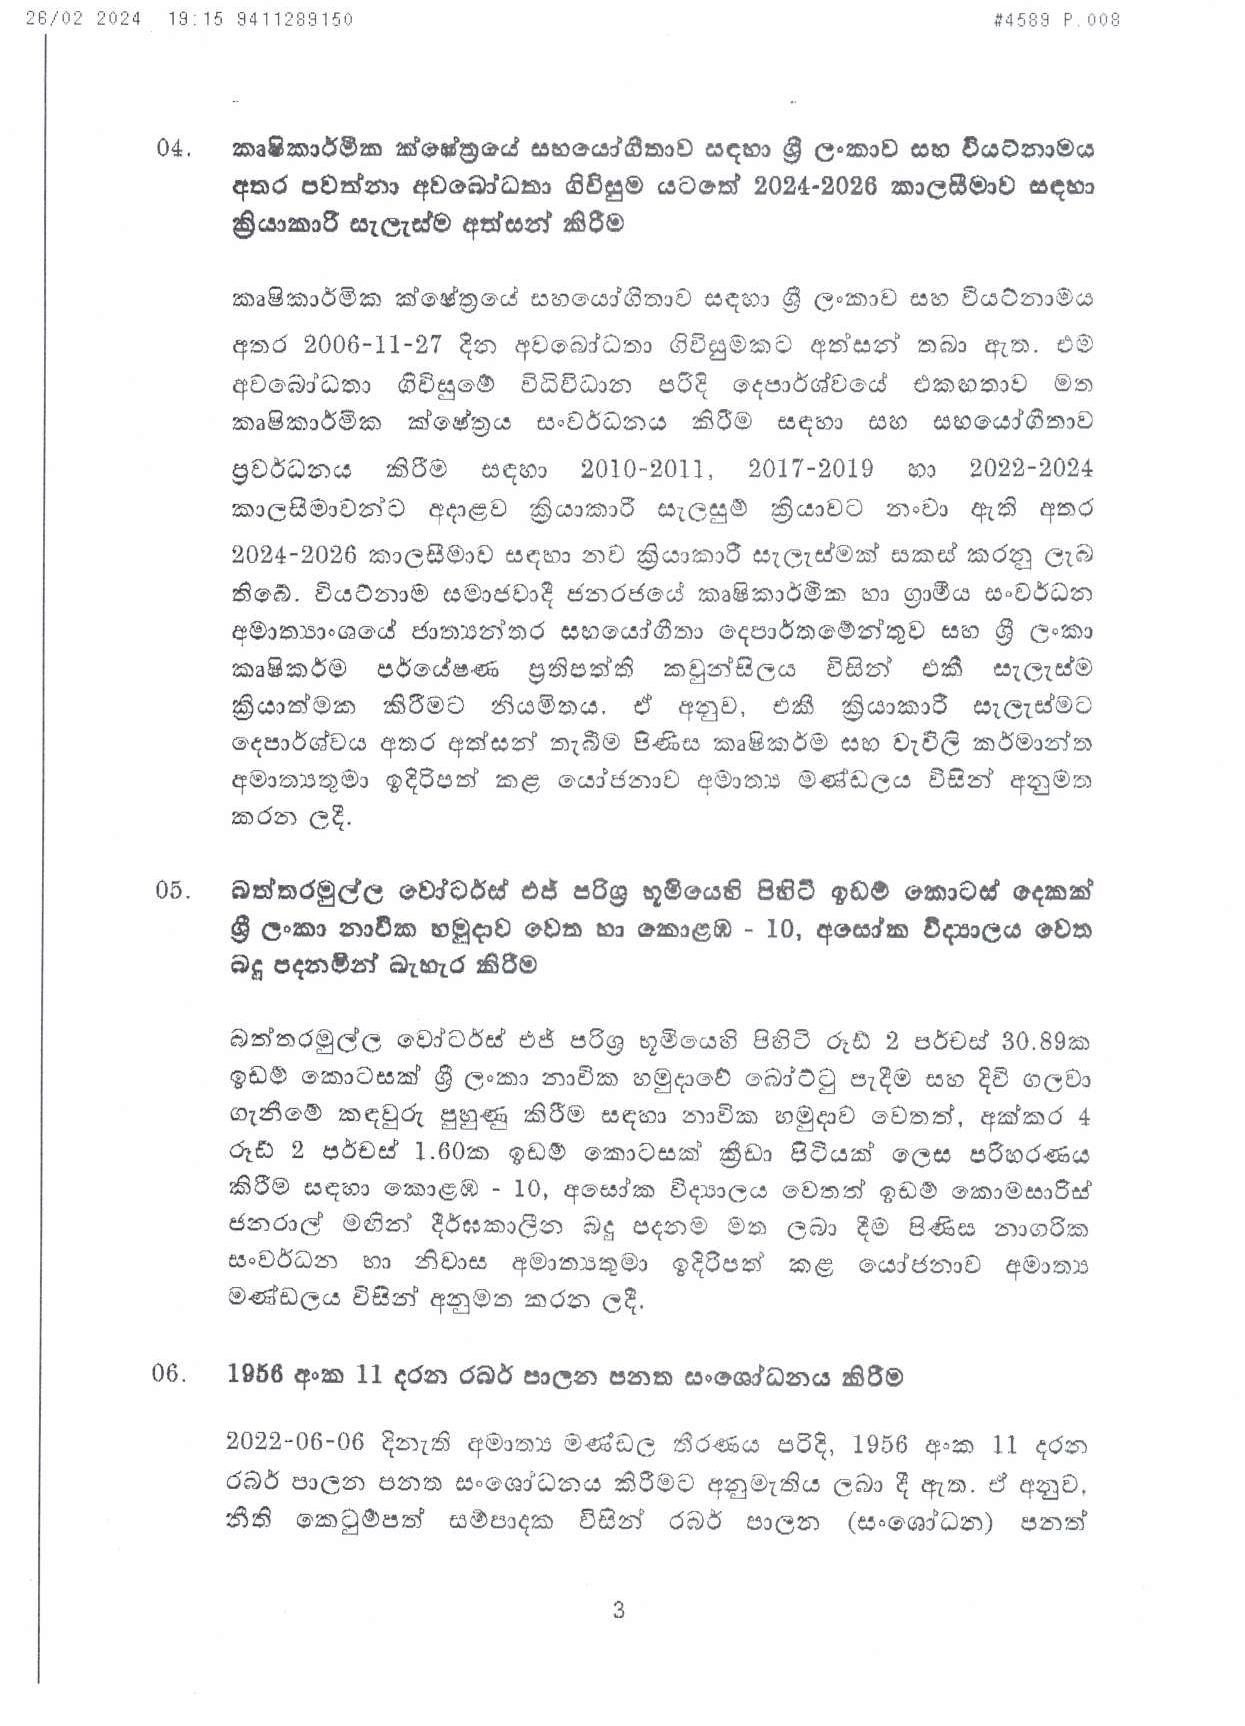 Cabinet Decision on 26.02.2024 page 003